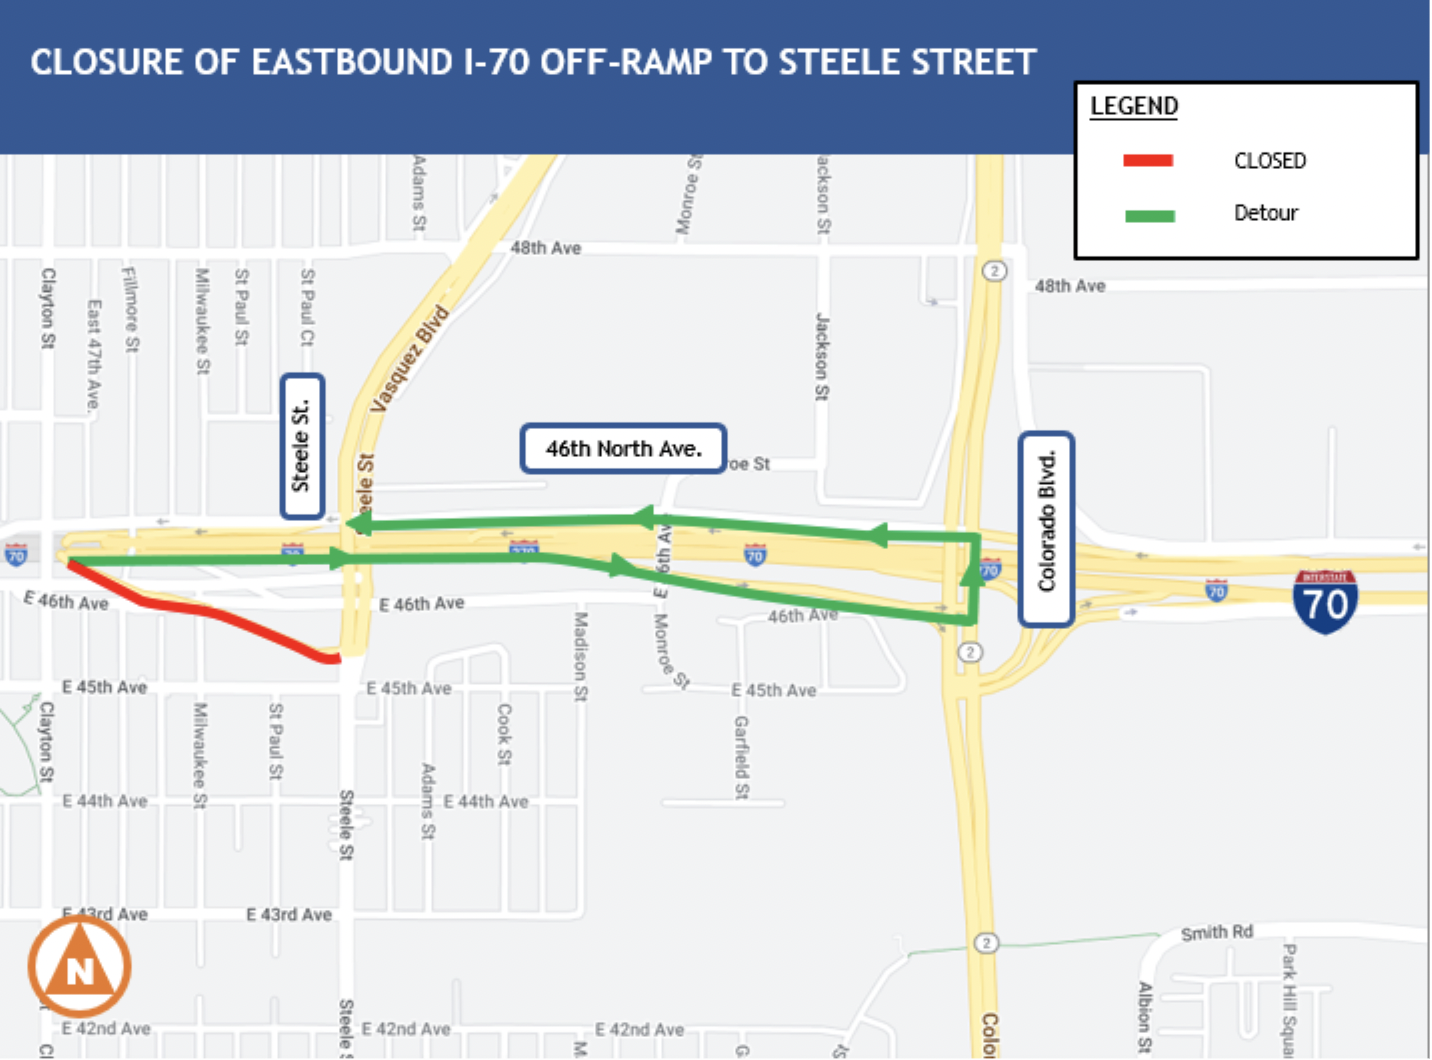 Closure of I-70 offramp to Steele Street closure detail image